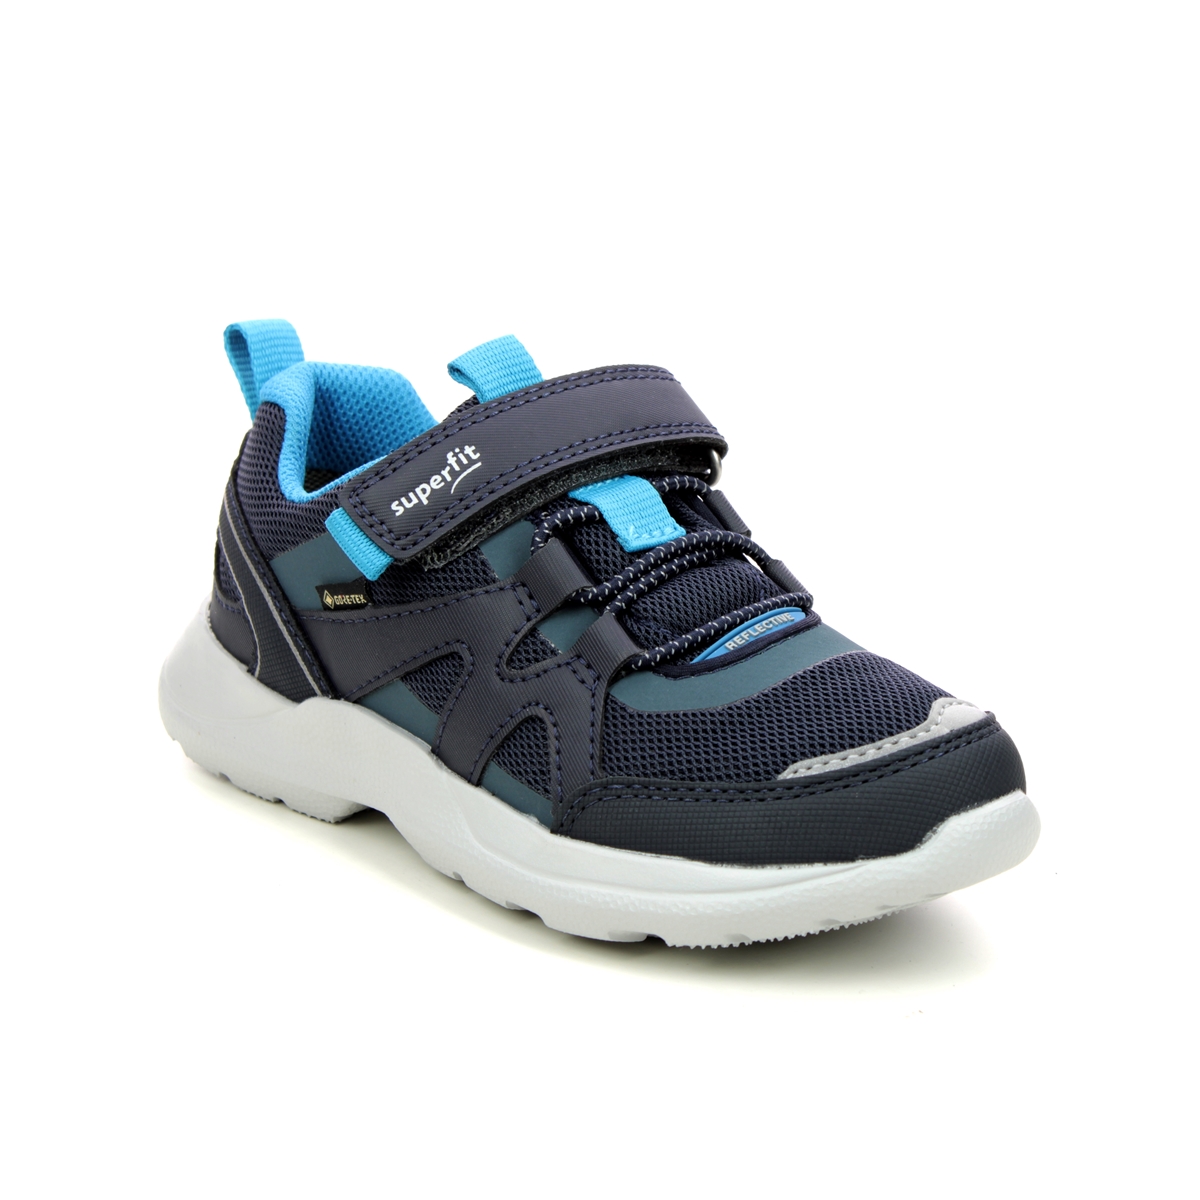 Superfit Rush Jnr B Gtx Navy Kids Trainers 1006219-8030 In Size 33 In Plain Navy For kids